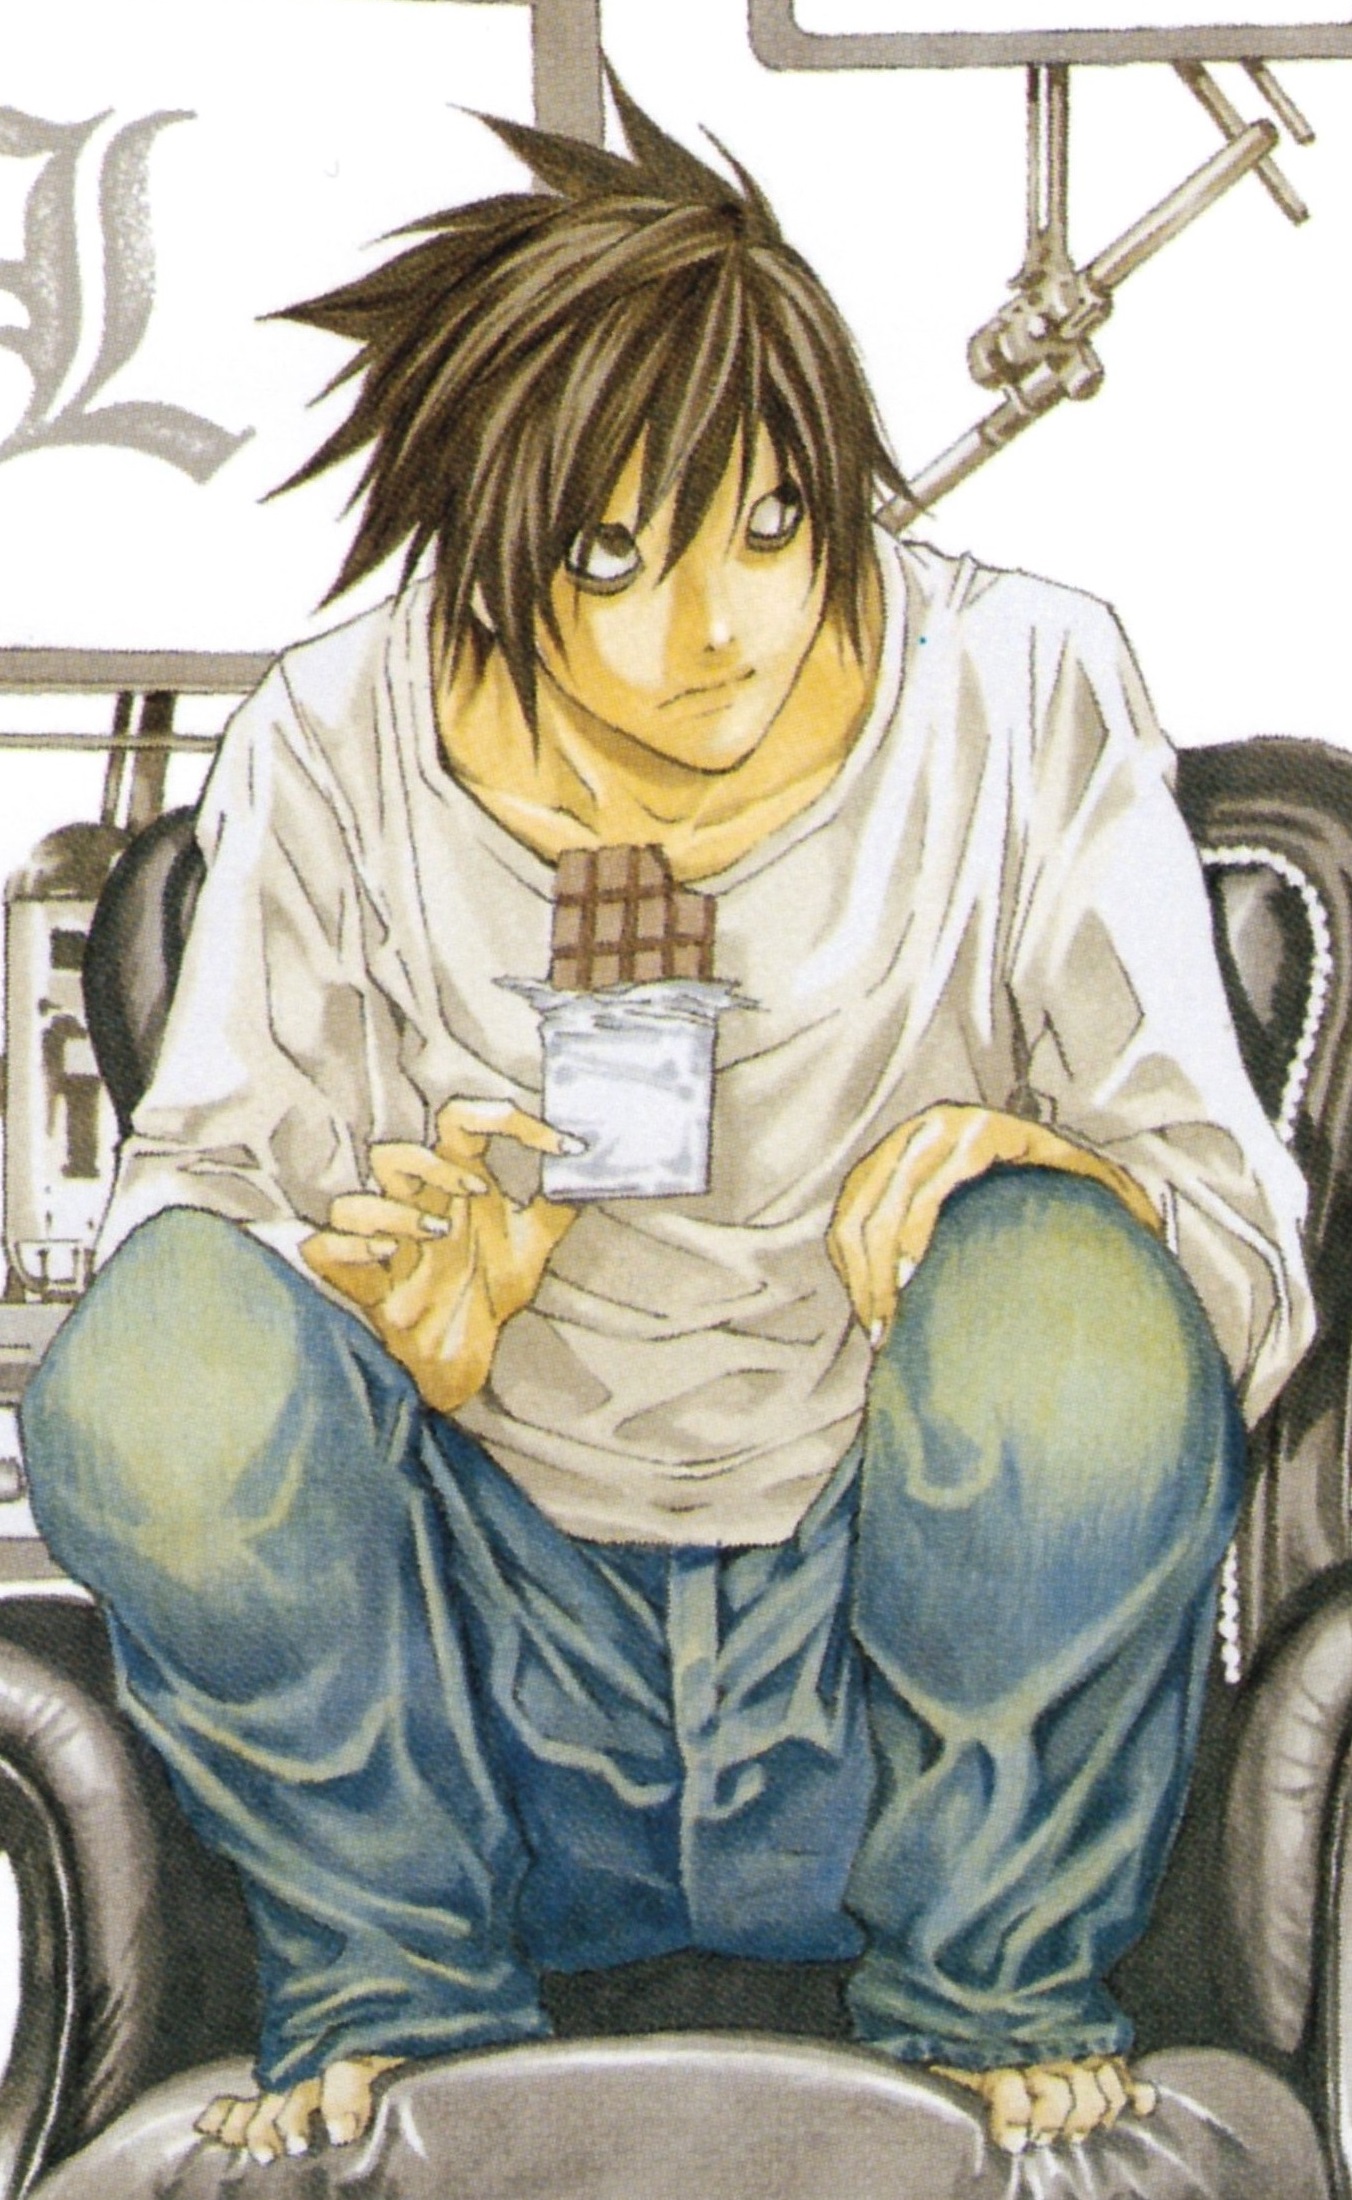 The Life Of L (Death Note) - YouTube